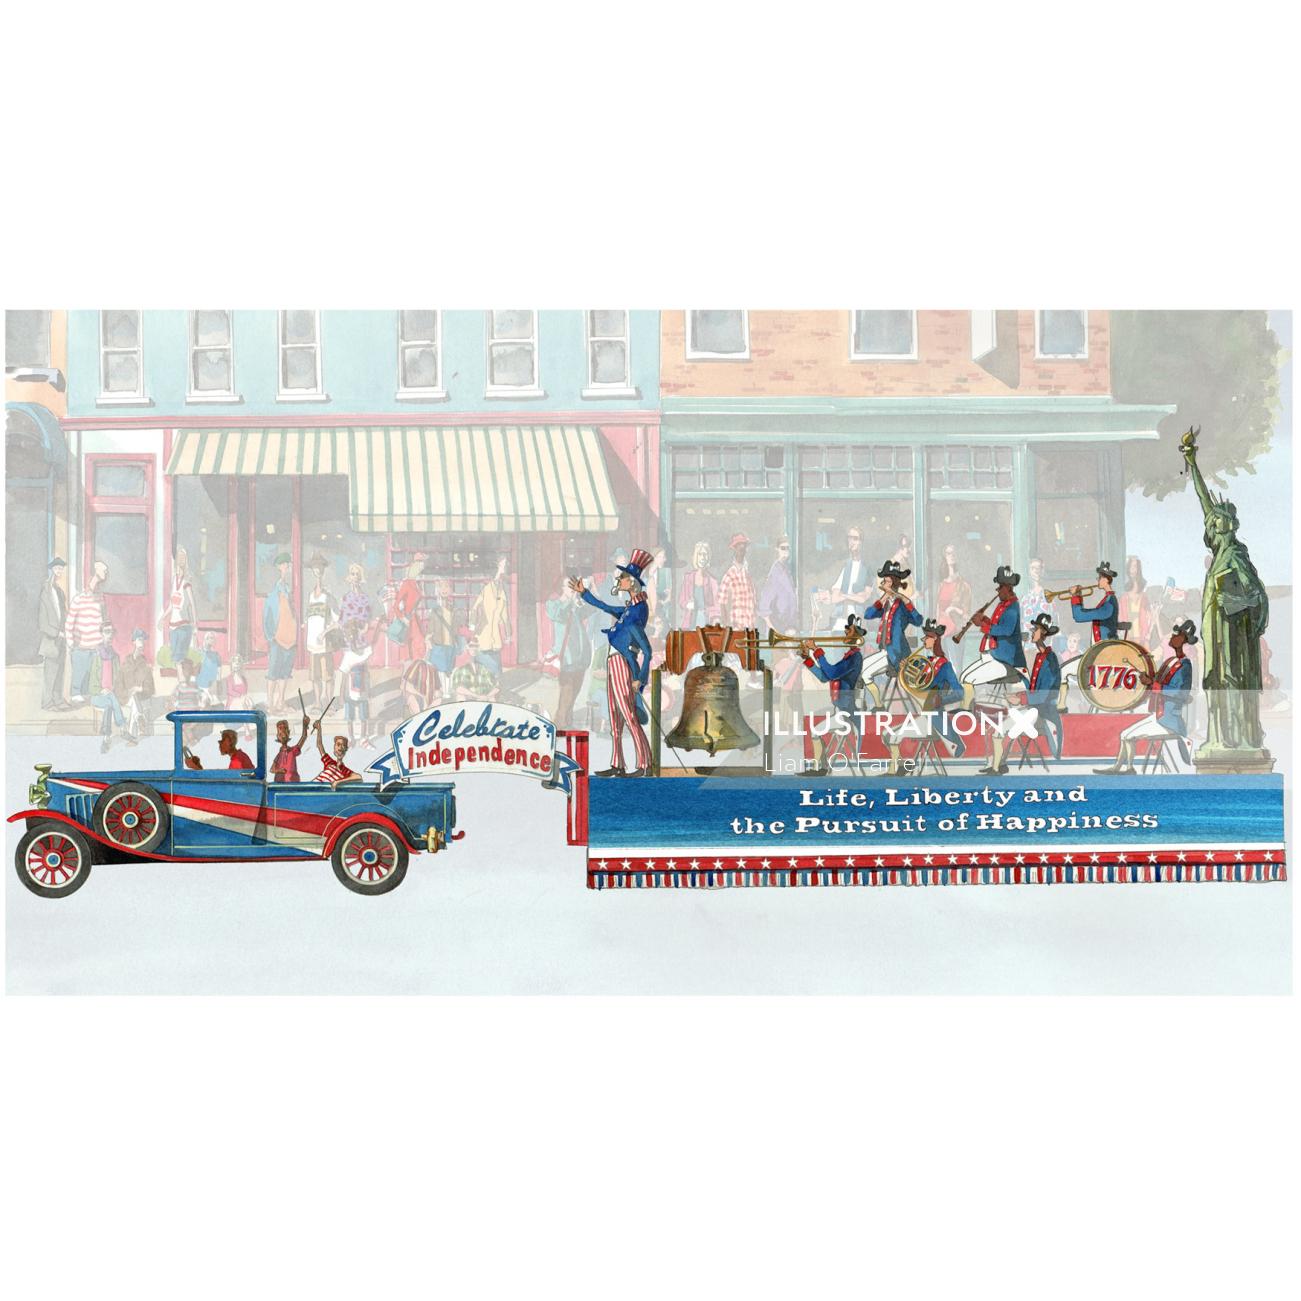 Watercolor illustration showing 4th of July Parade in US